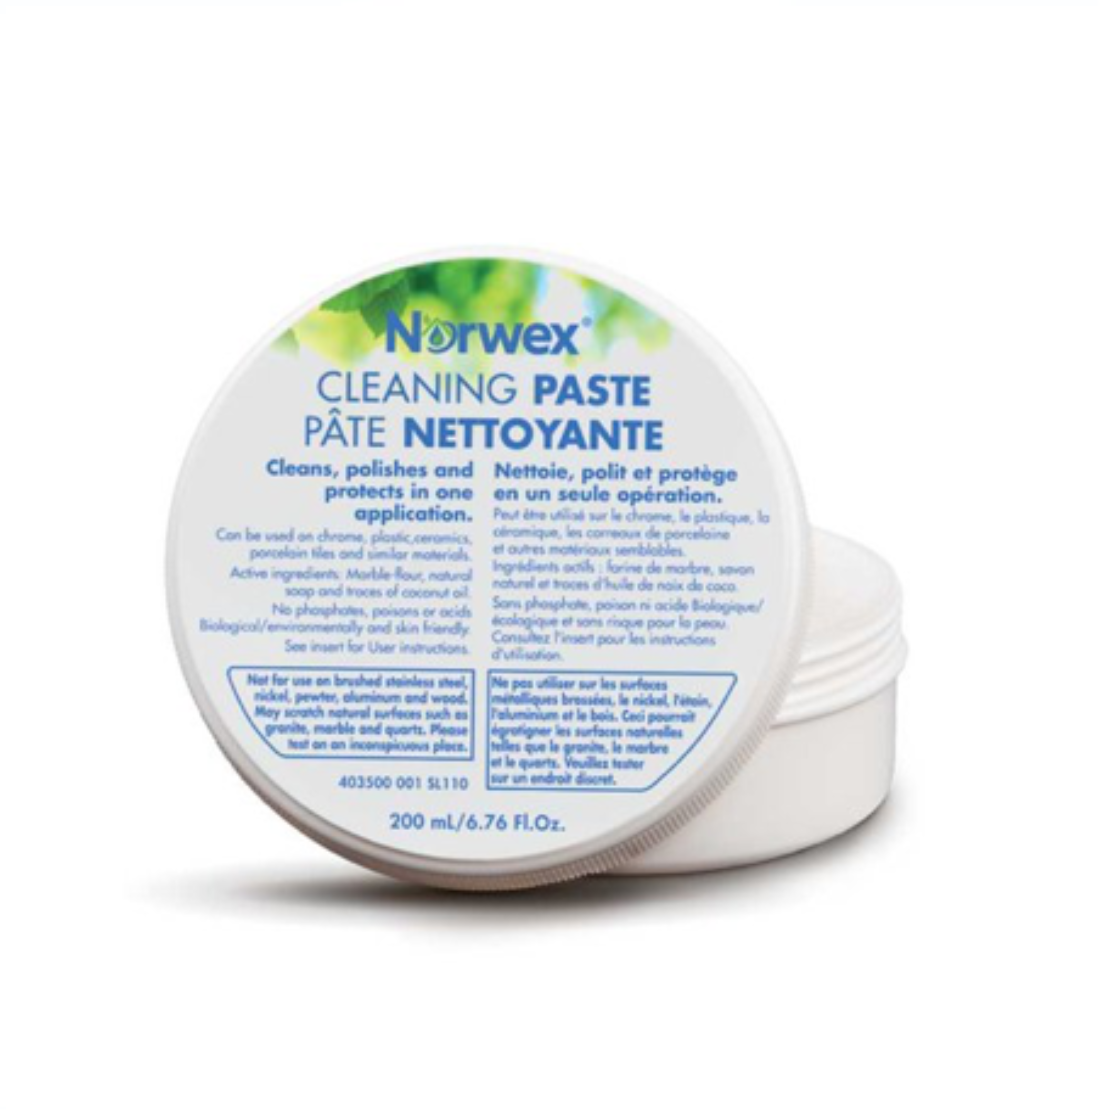 Cleaning Paste